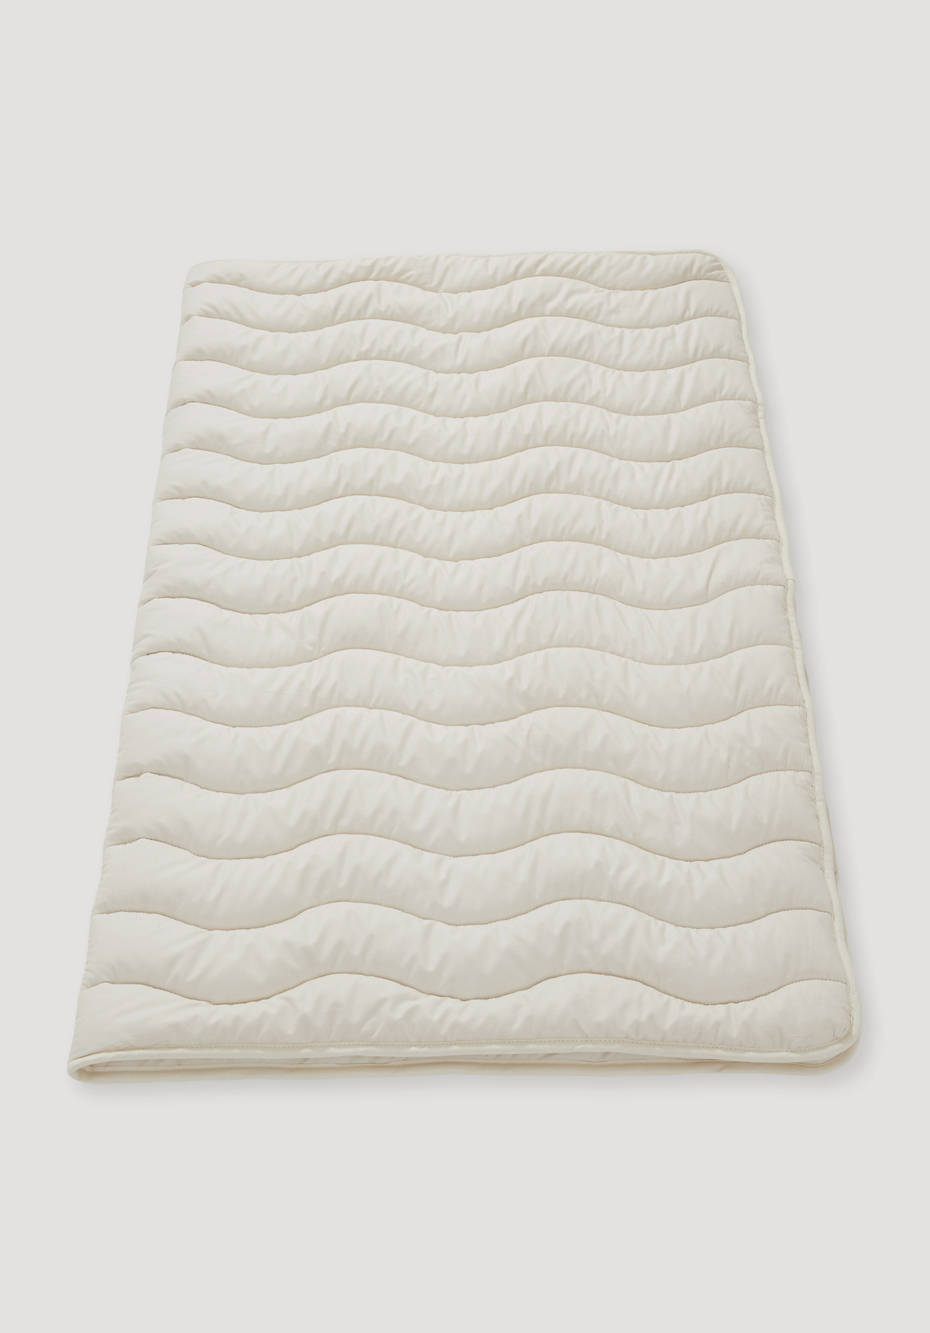 Baby & children's blanket made from pure organic cotton